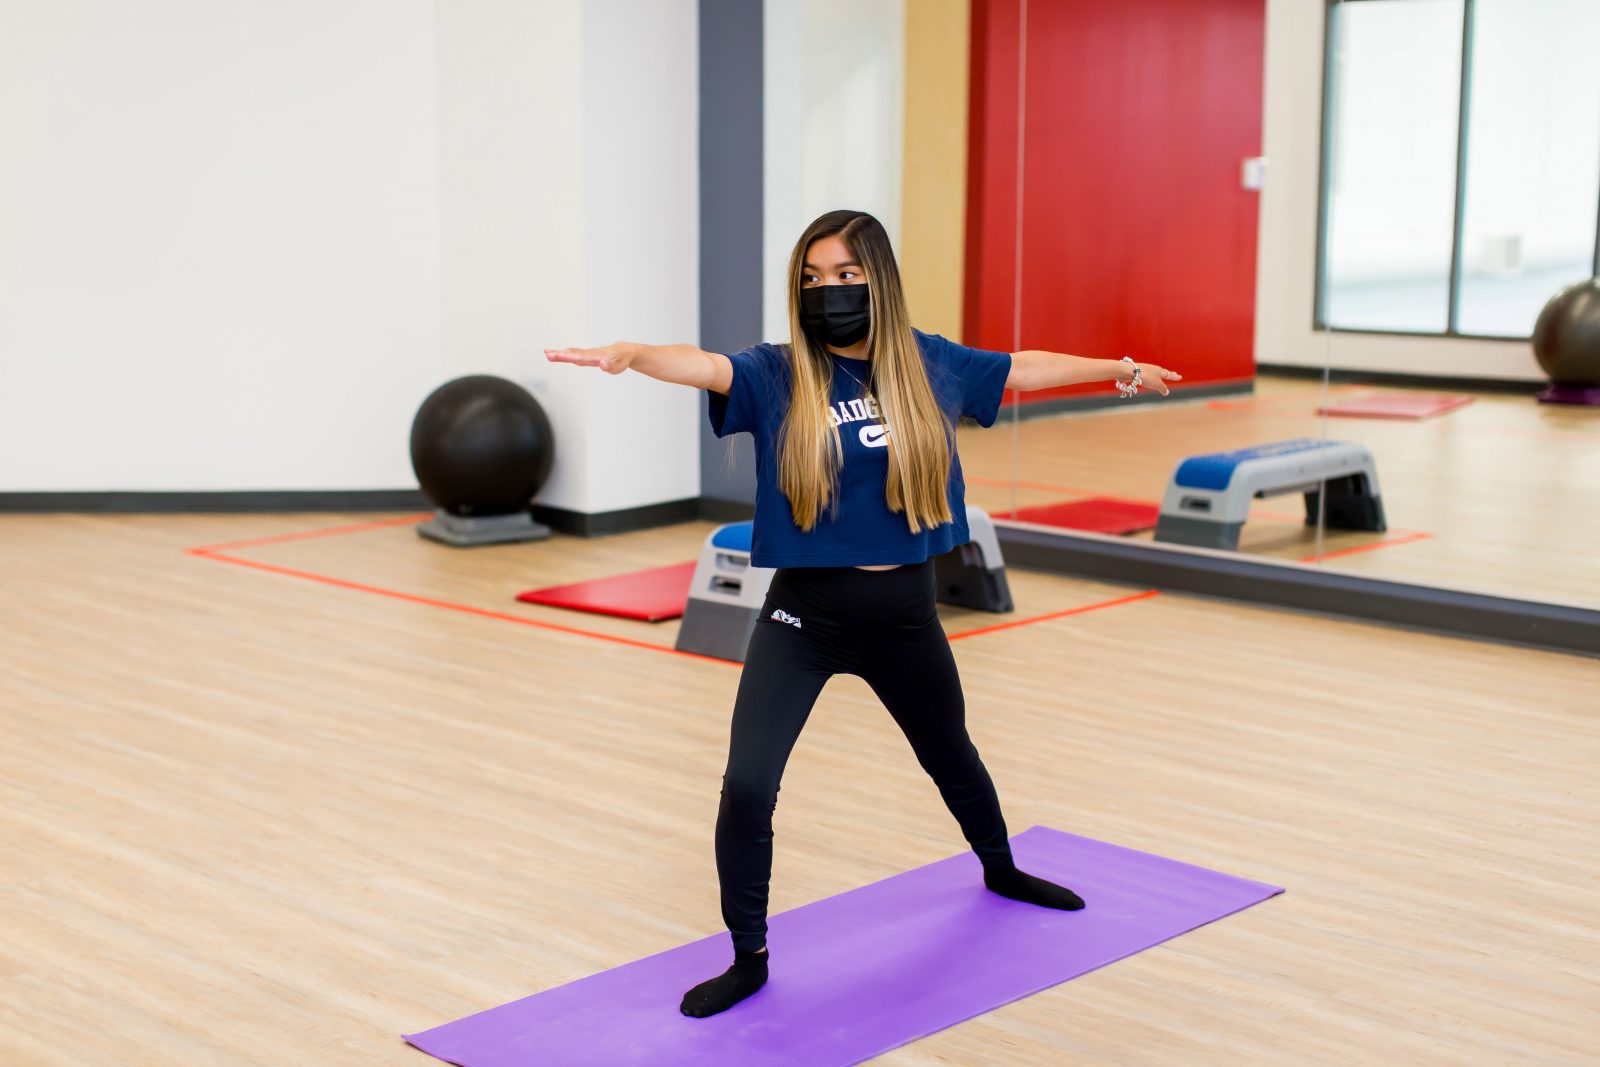 A masked woman stands on a purple yoga mat in a gym with her arms outstretched. She has waist-length hair and is wearing a black face mask, dark blue Nike T-shirt with ‘Badgers’ written on it, black yoga tights and black socks.